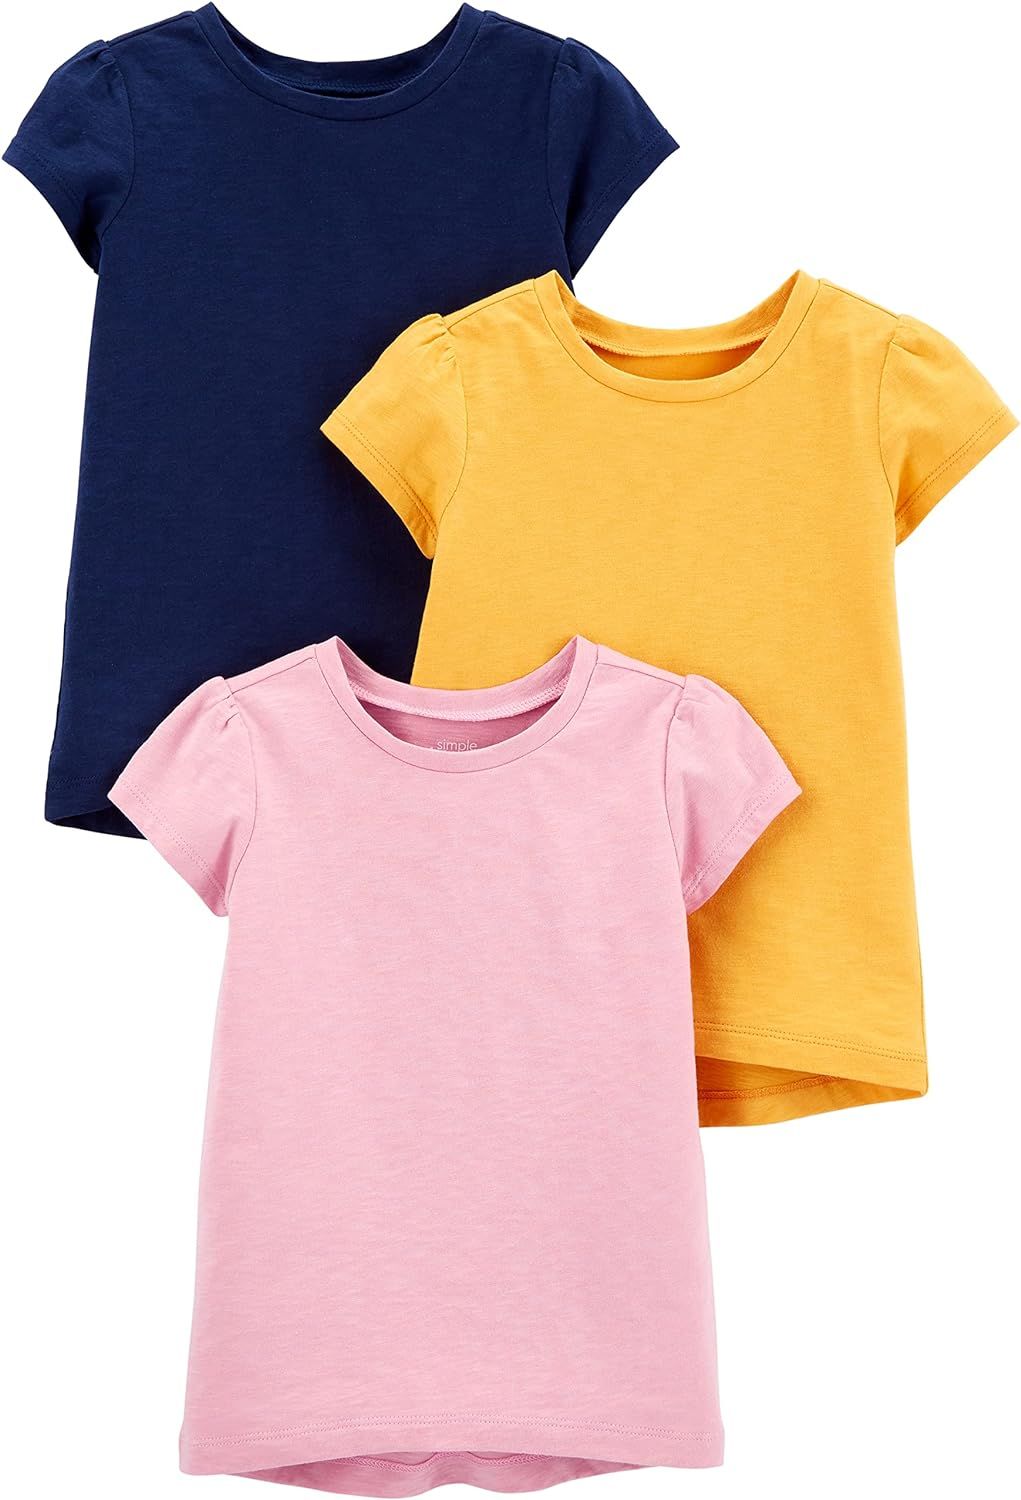 Simple Joys by Carter's Babies, Toddlers, and Girls' Solid Short-Sleeve Tee Shirts, Pack of 3 | Amazon (US)